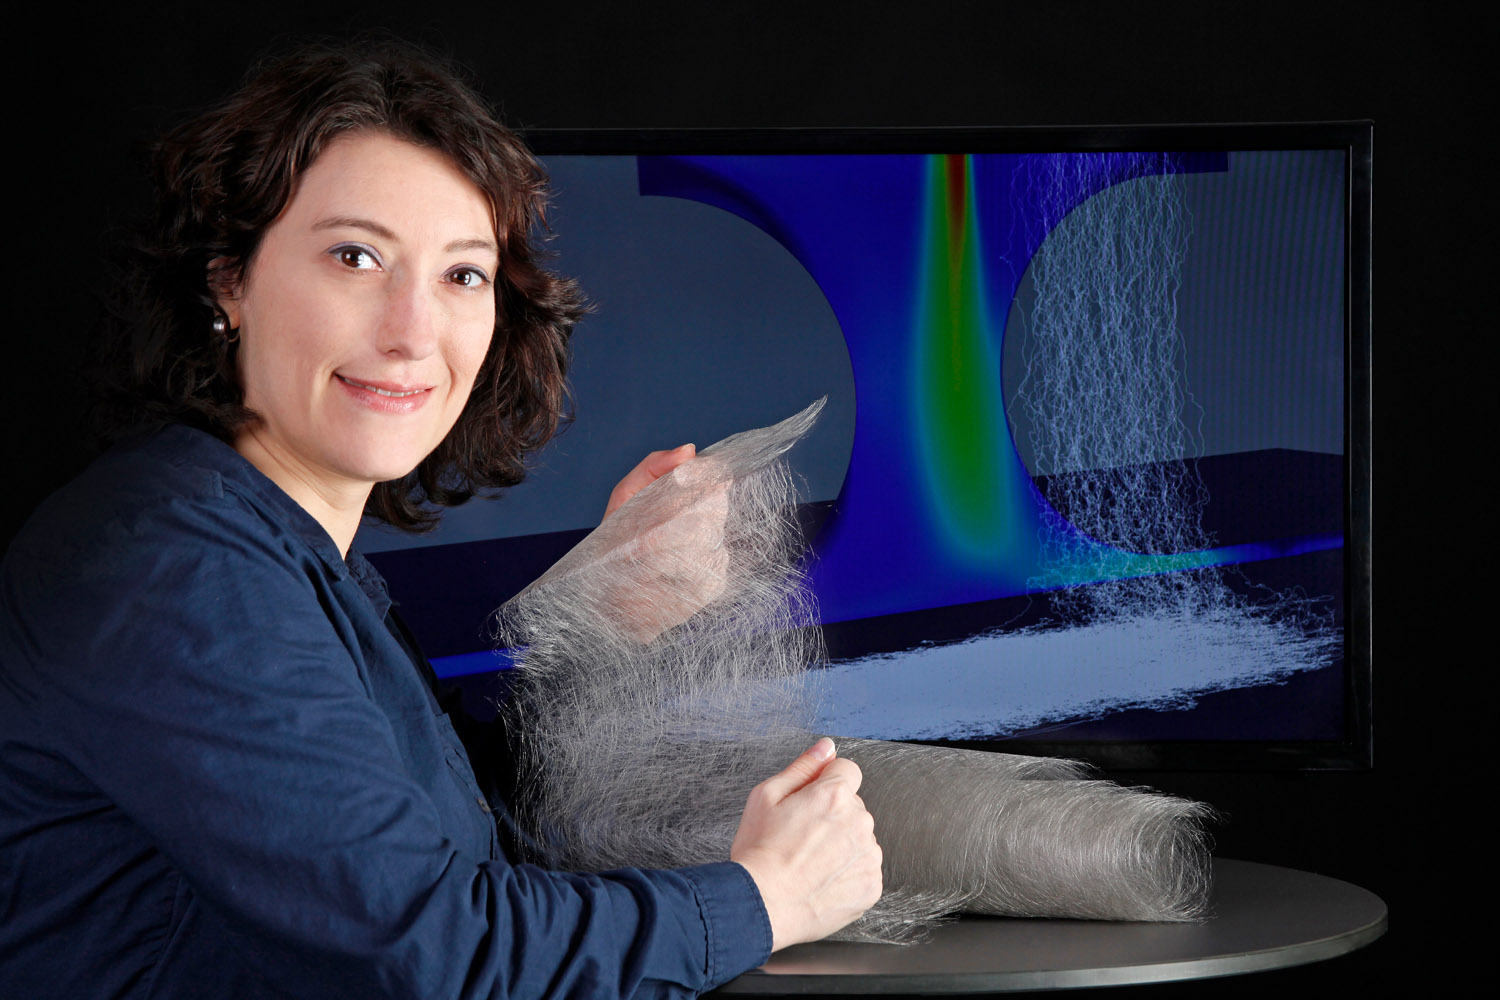 High-tech material non-woven: Project manager Dr. Simone Gramsch has developed the simulation tool FIDYST with her team. The simulation of fiber movements in air flows improves the production of non-woven materials.